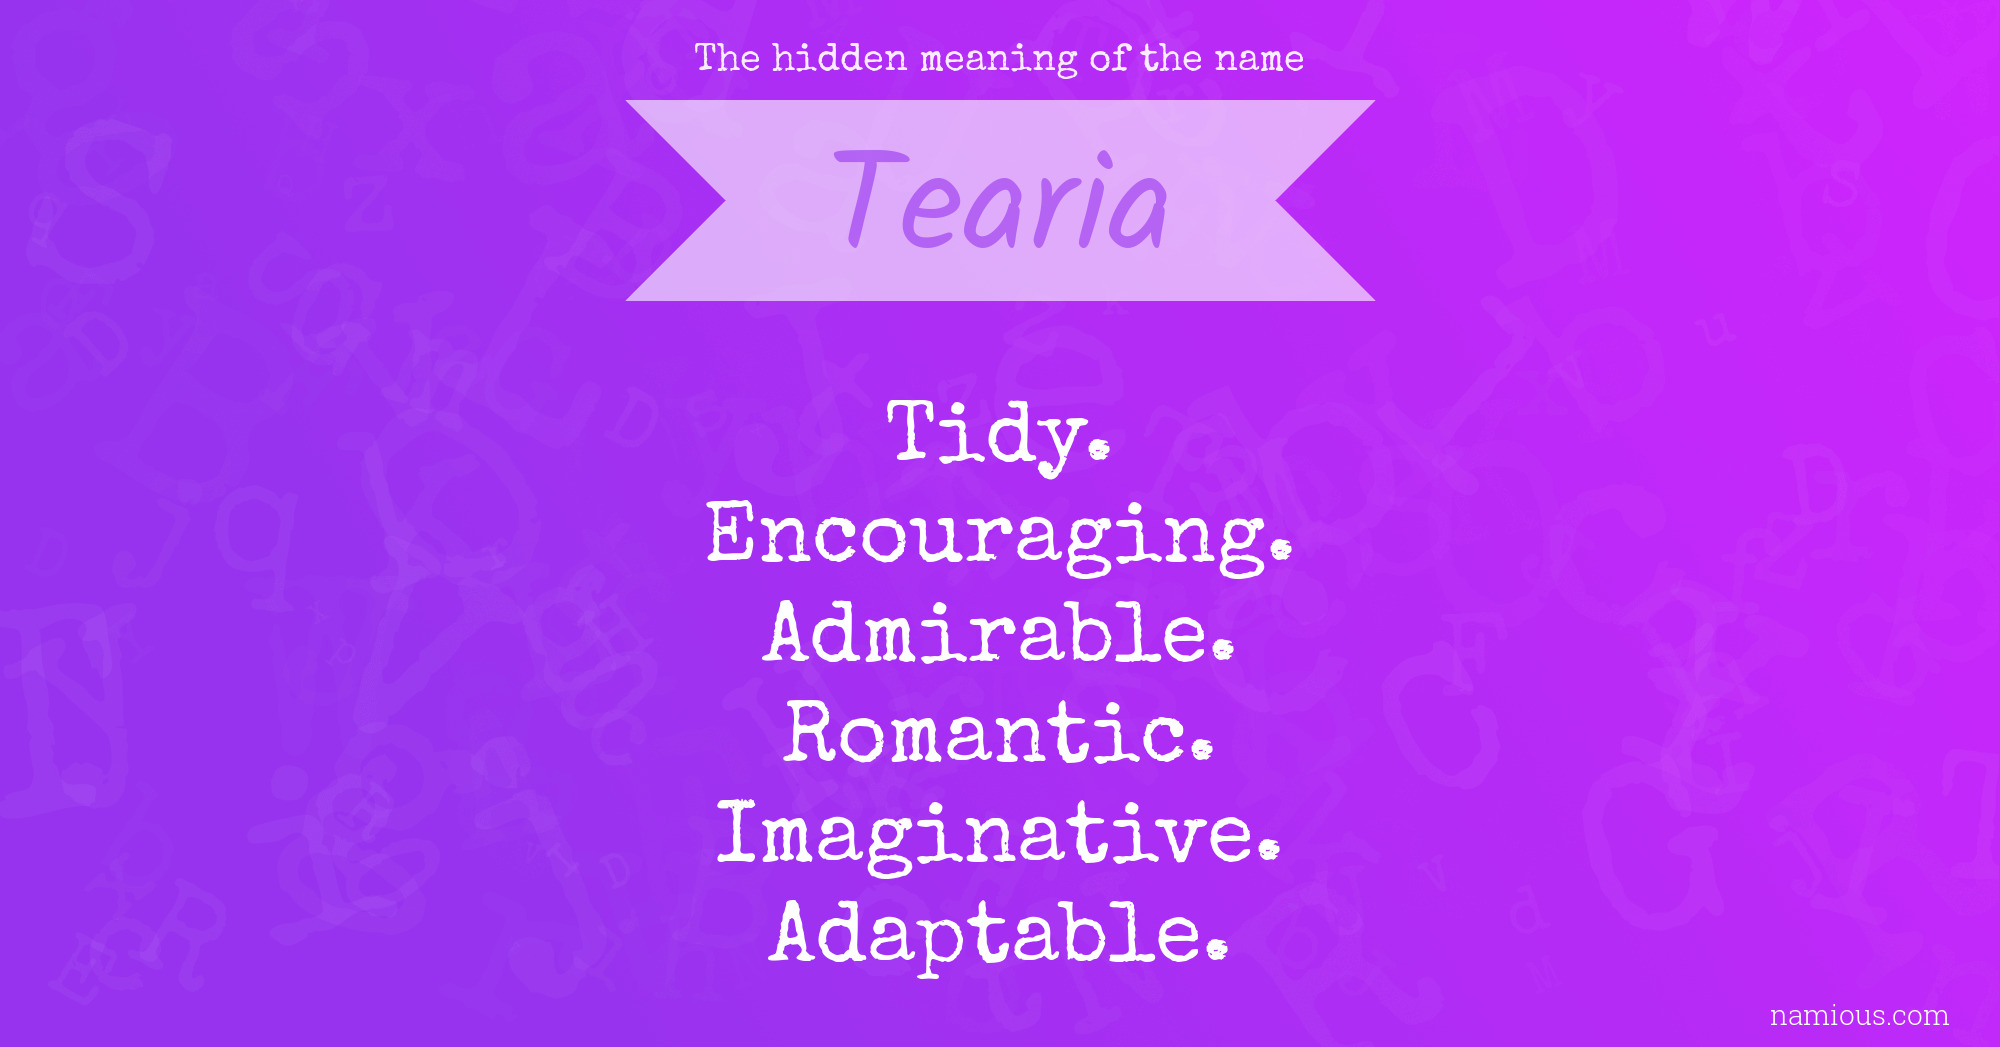 The hidden meaning of the name Tearia